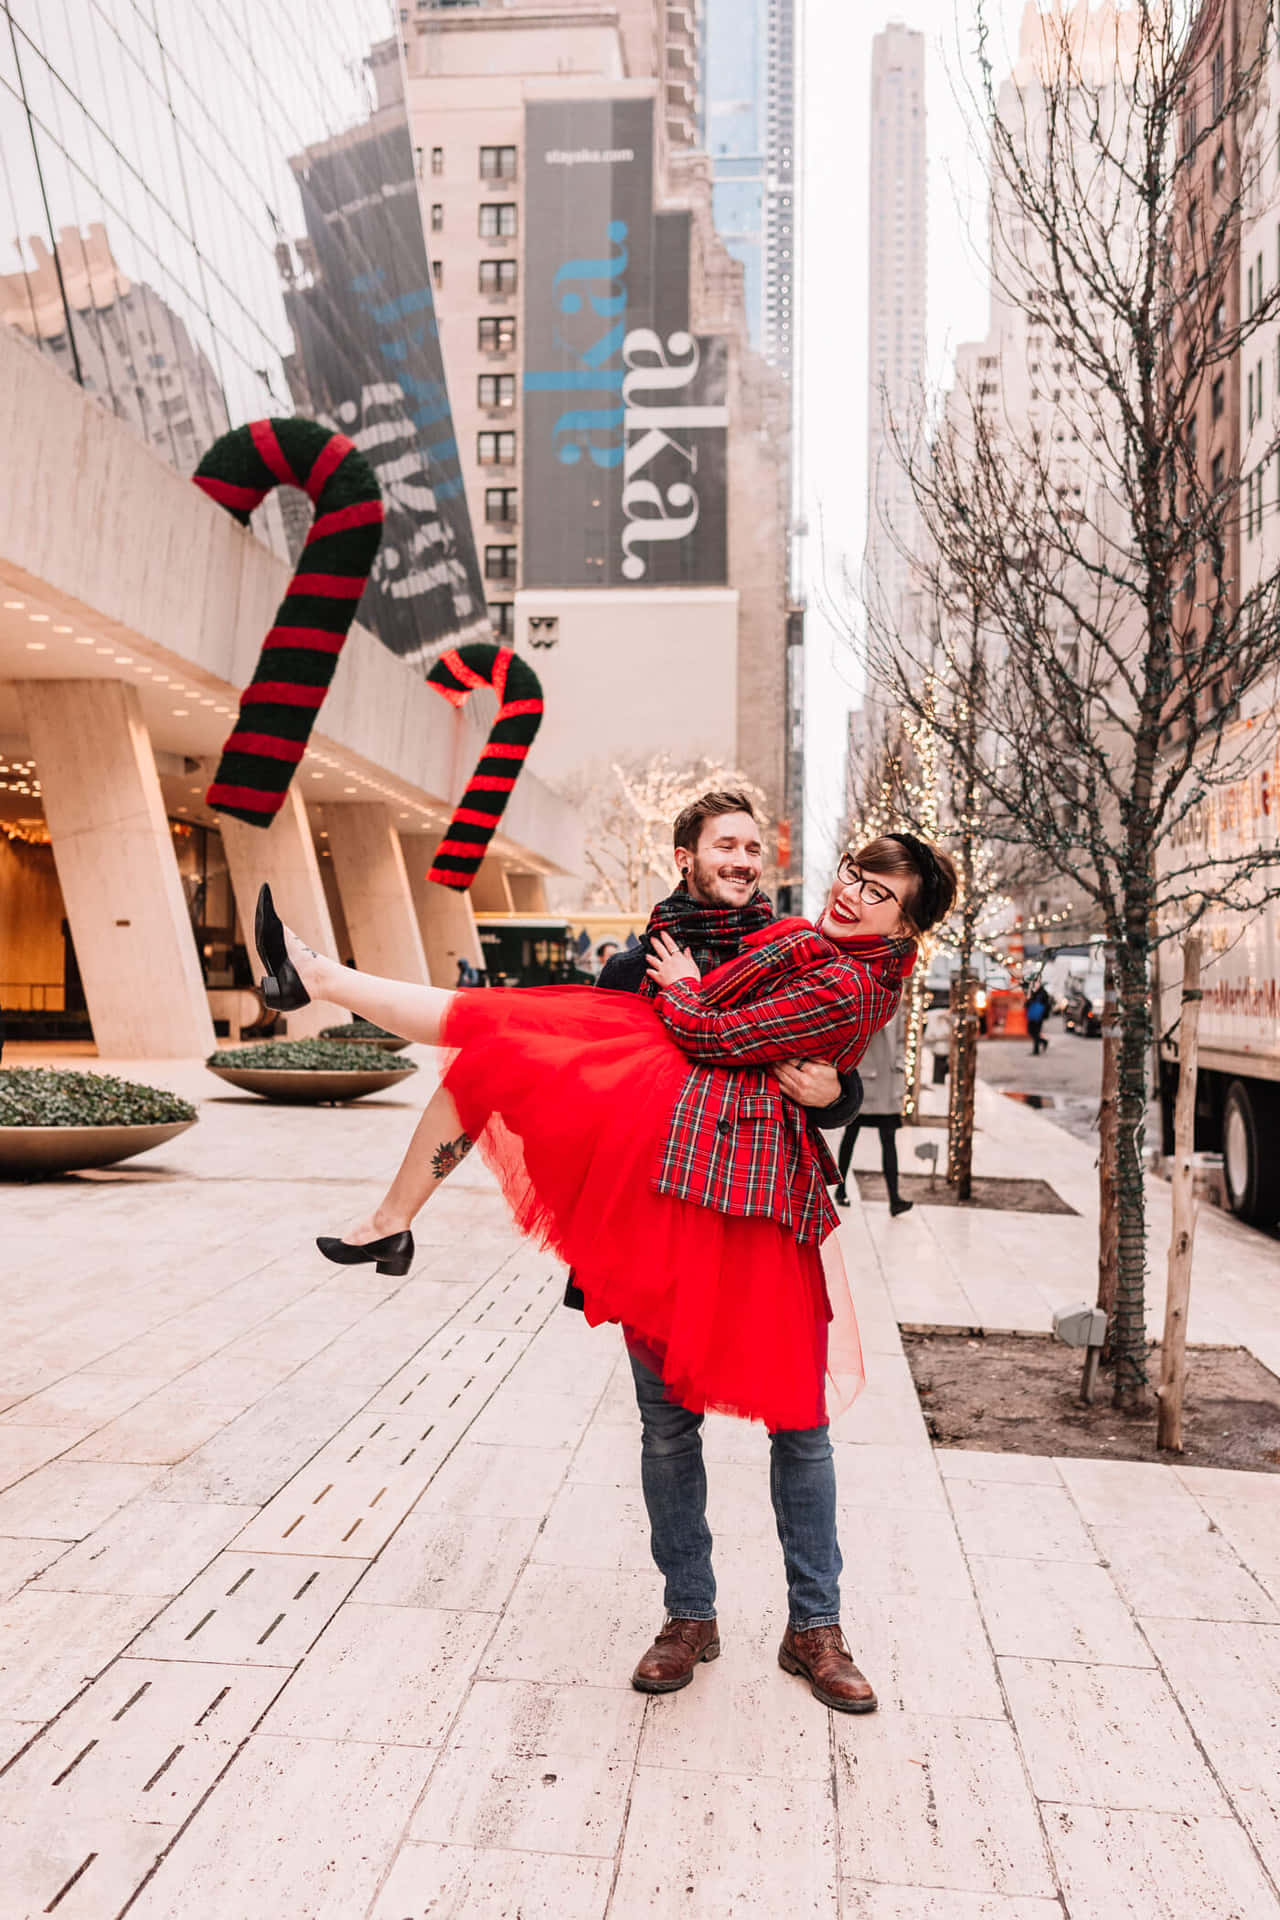 A Couple In A Red Dress Is Holding Hands In Front Of A City